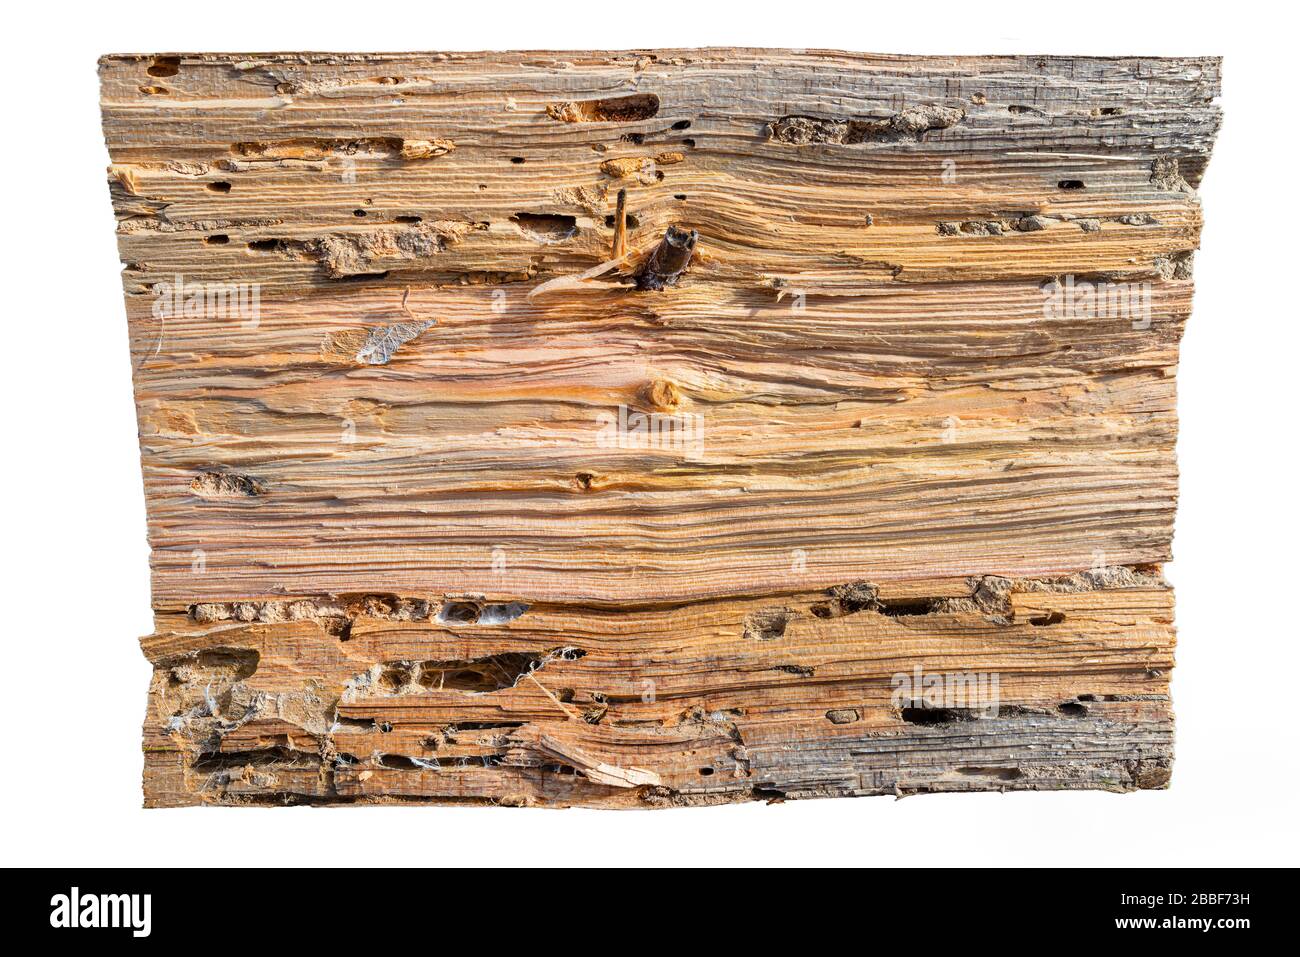 Background made of wood damaged by bark beetles, visible canals and tunnels, isolated on white background with a clipping path. Stock Photo